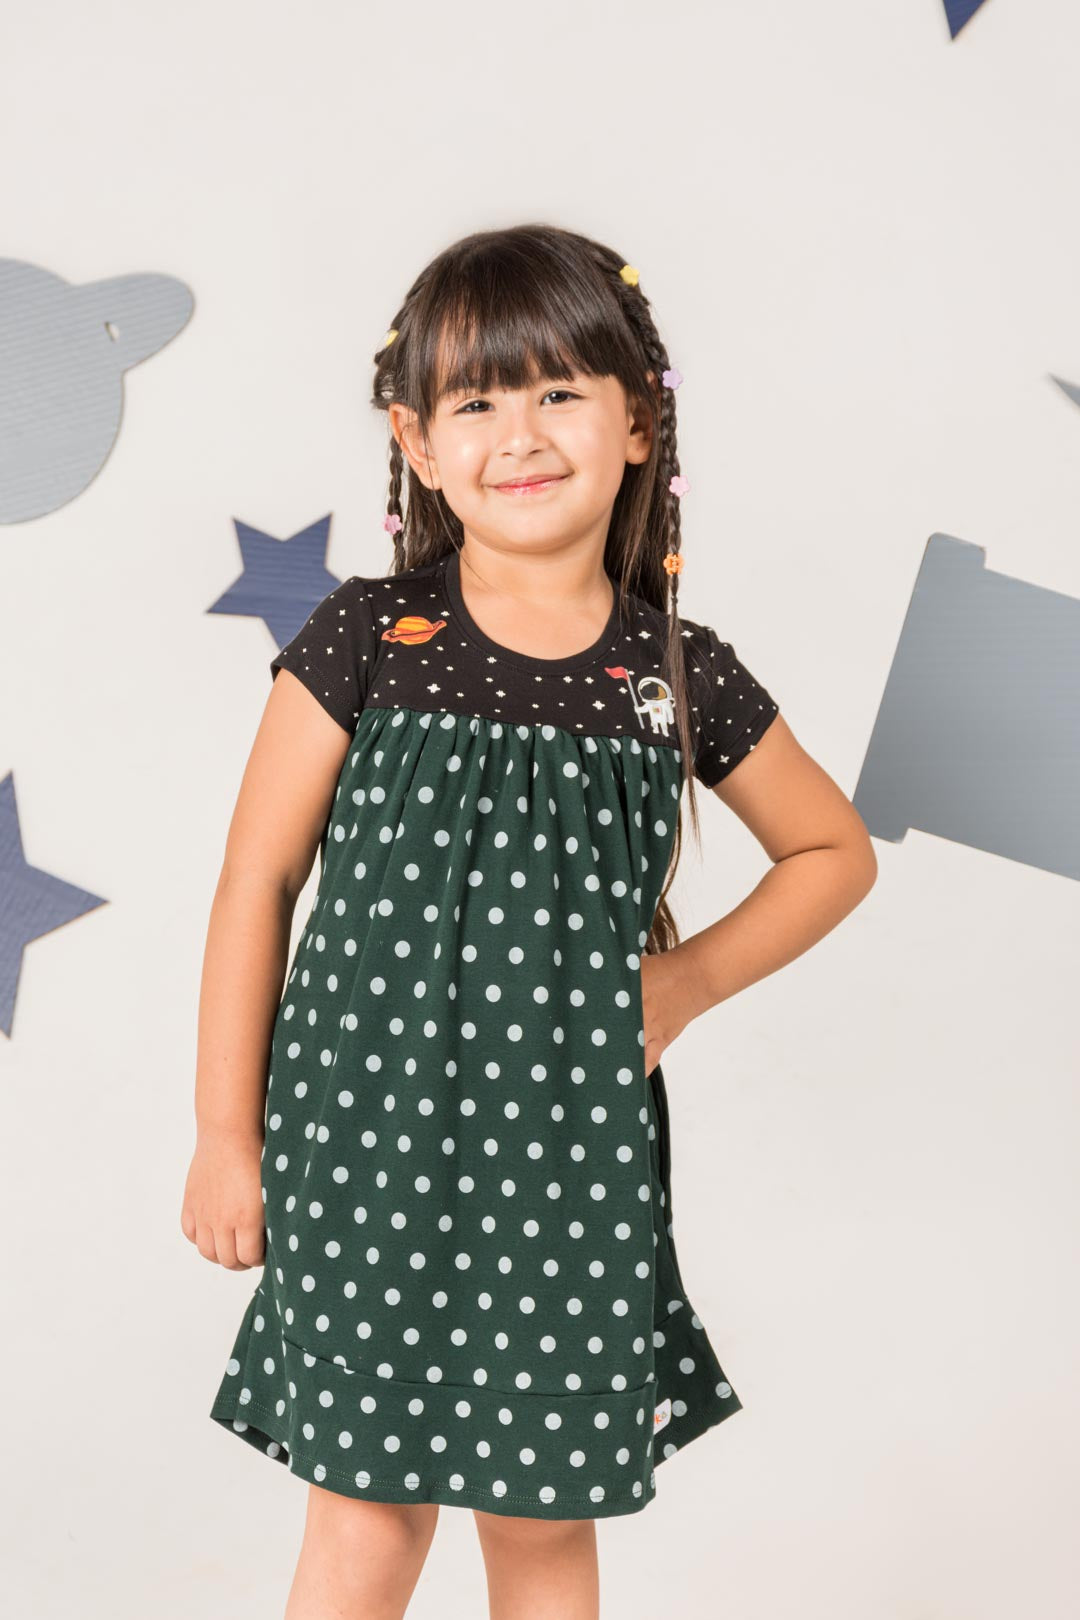 Girls wearing green space dress with pockets by prisma kiddos